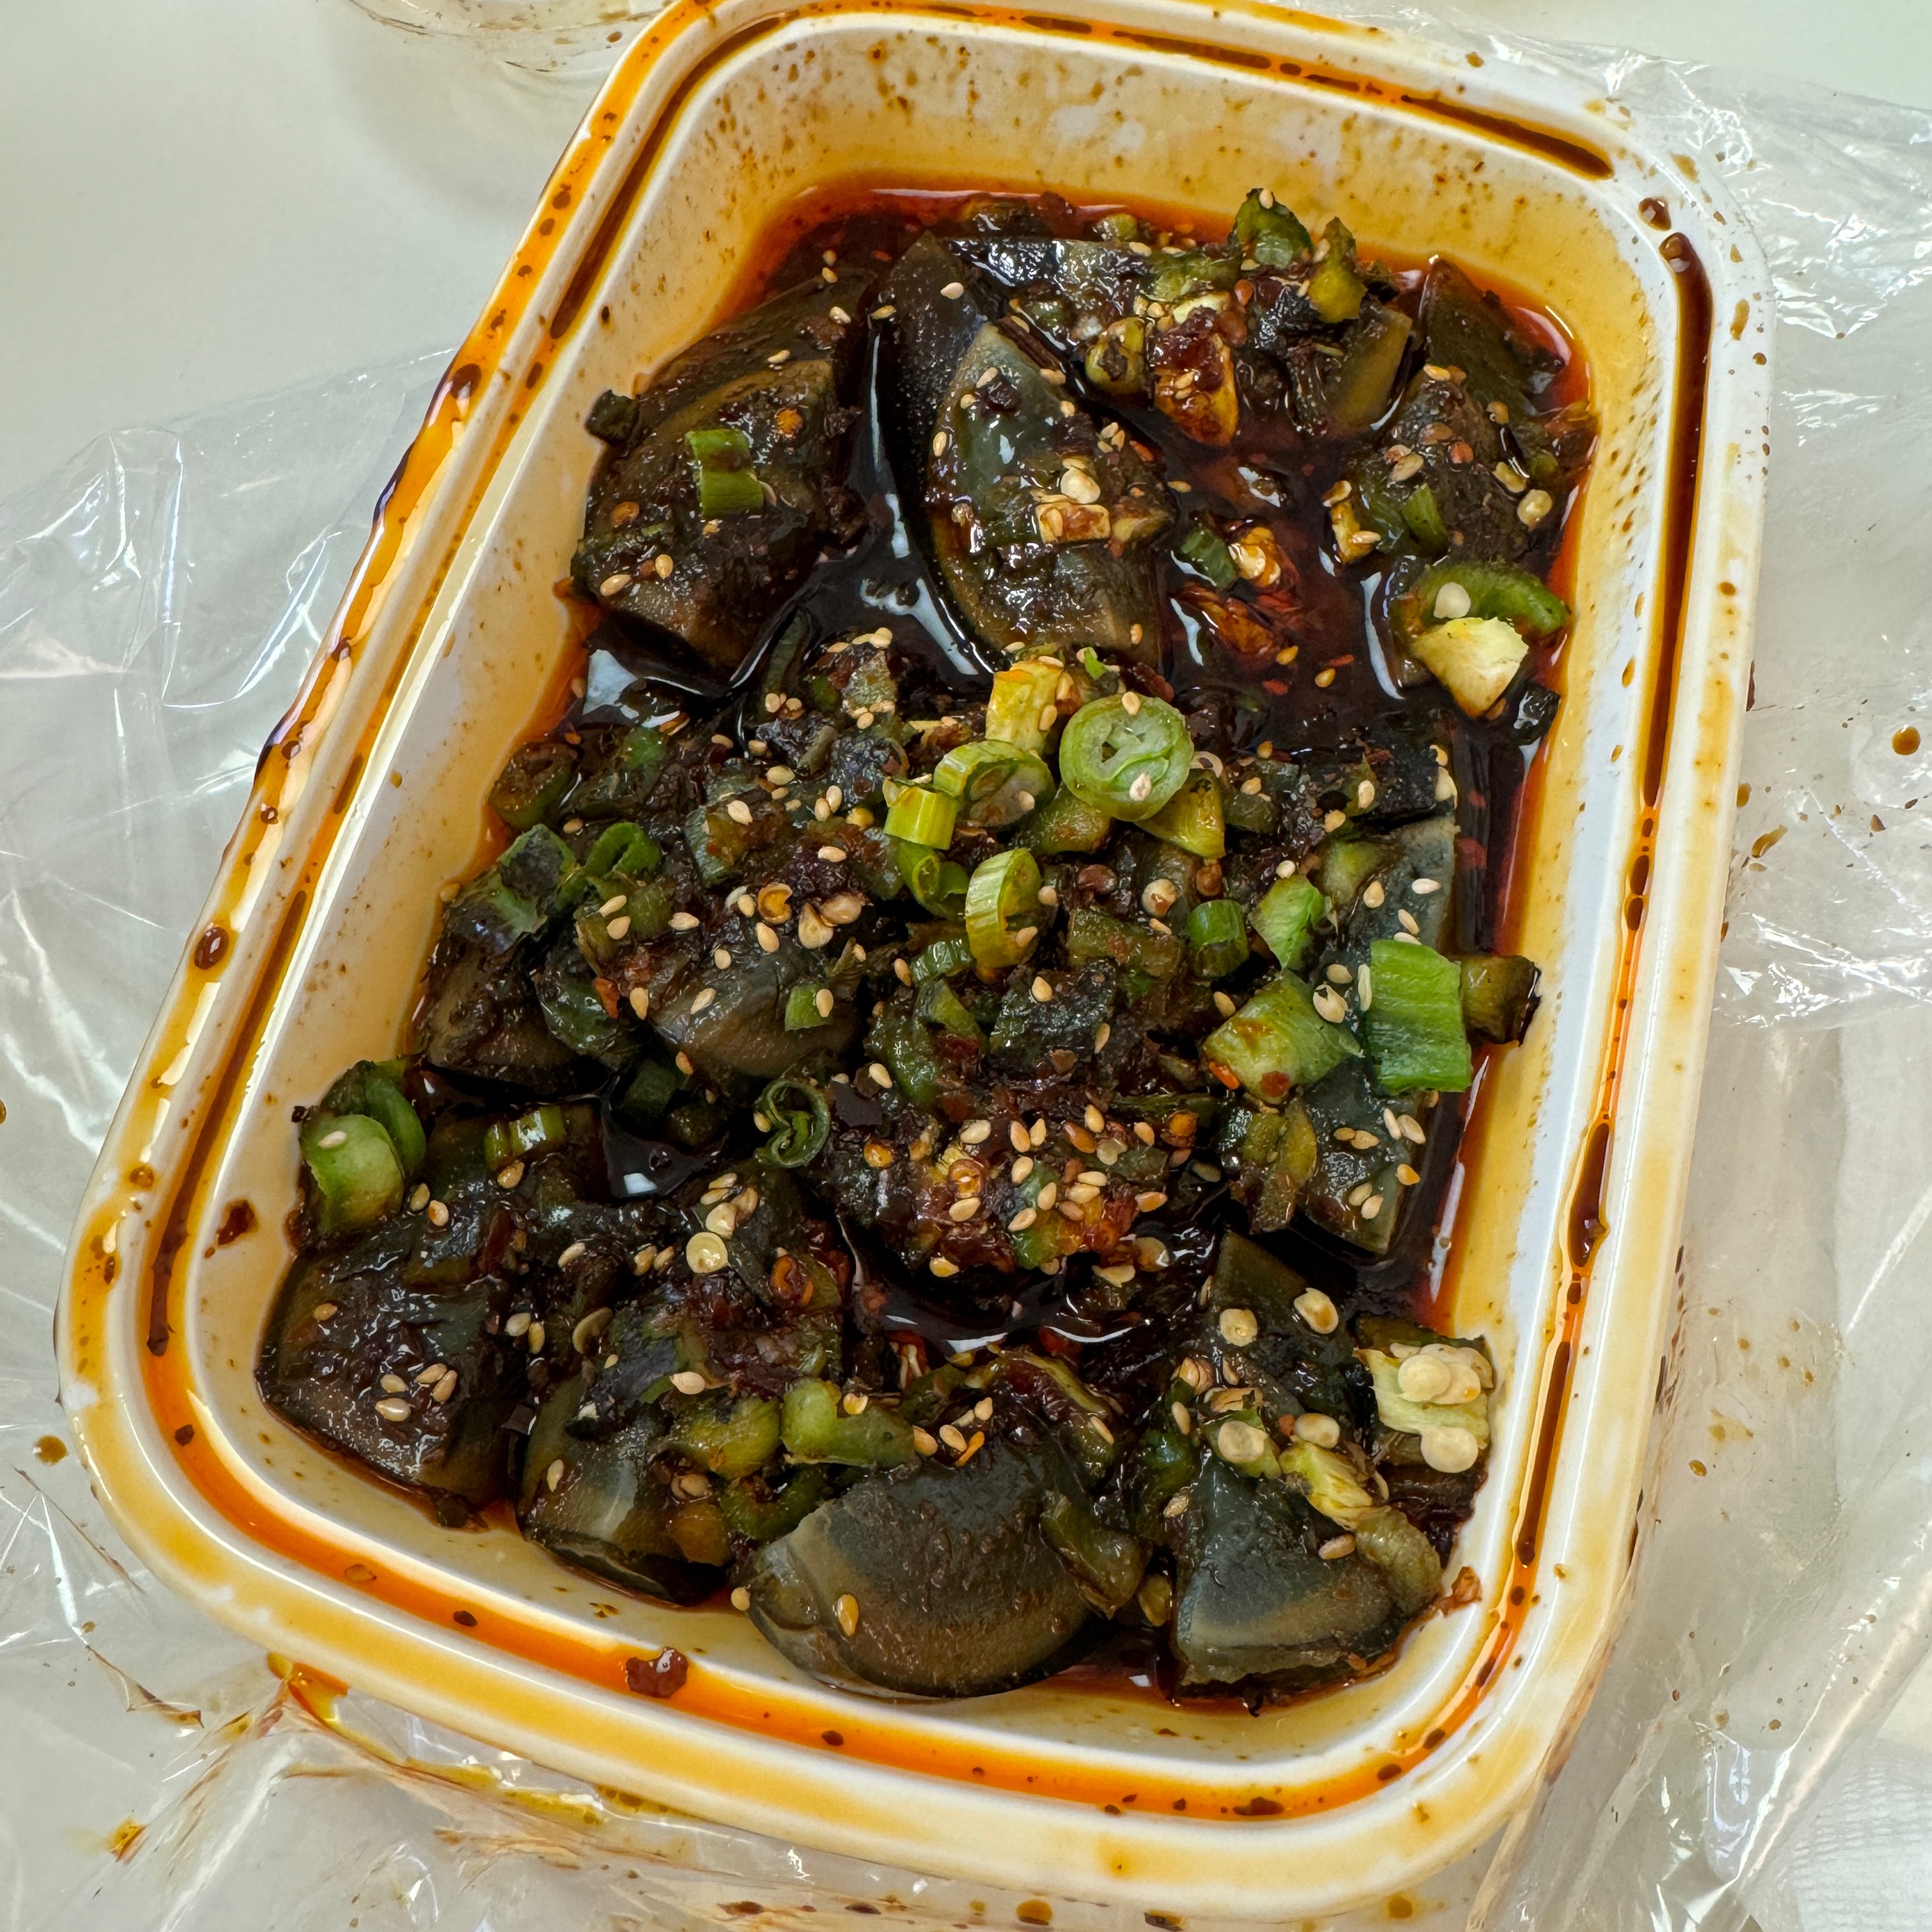 Mashed Peppers with Century Egg $9.50 from Cubist Circle on #foodmento http://foodmento.com/dish/57335